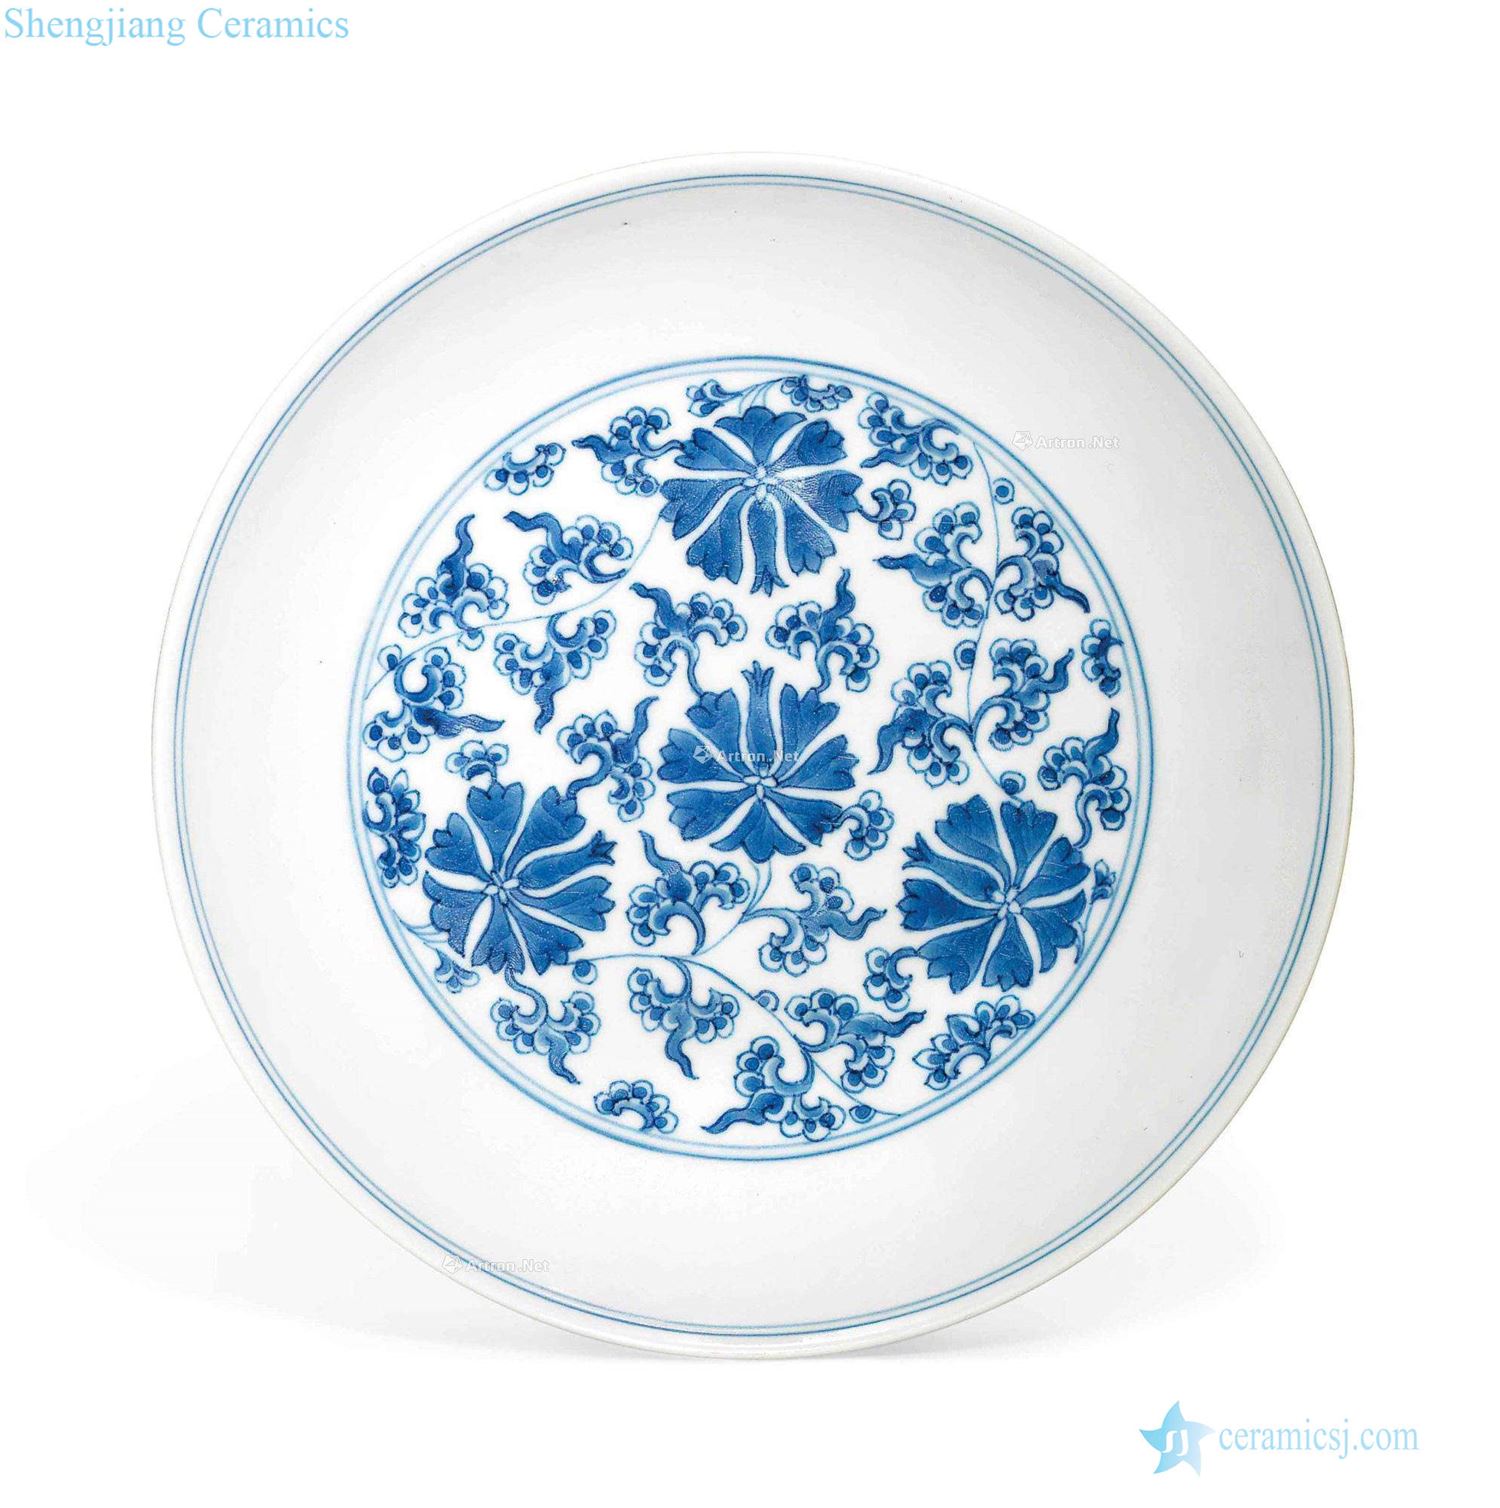 Qing daoguang Blue and white lotus flower tray